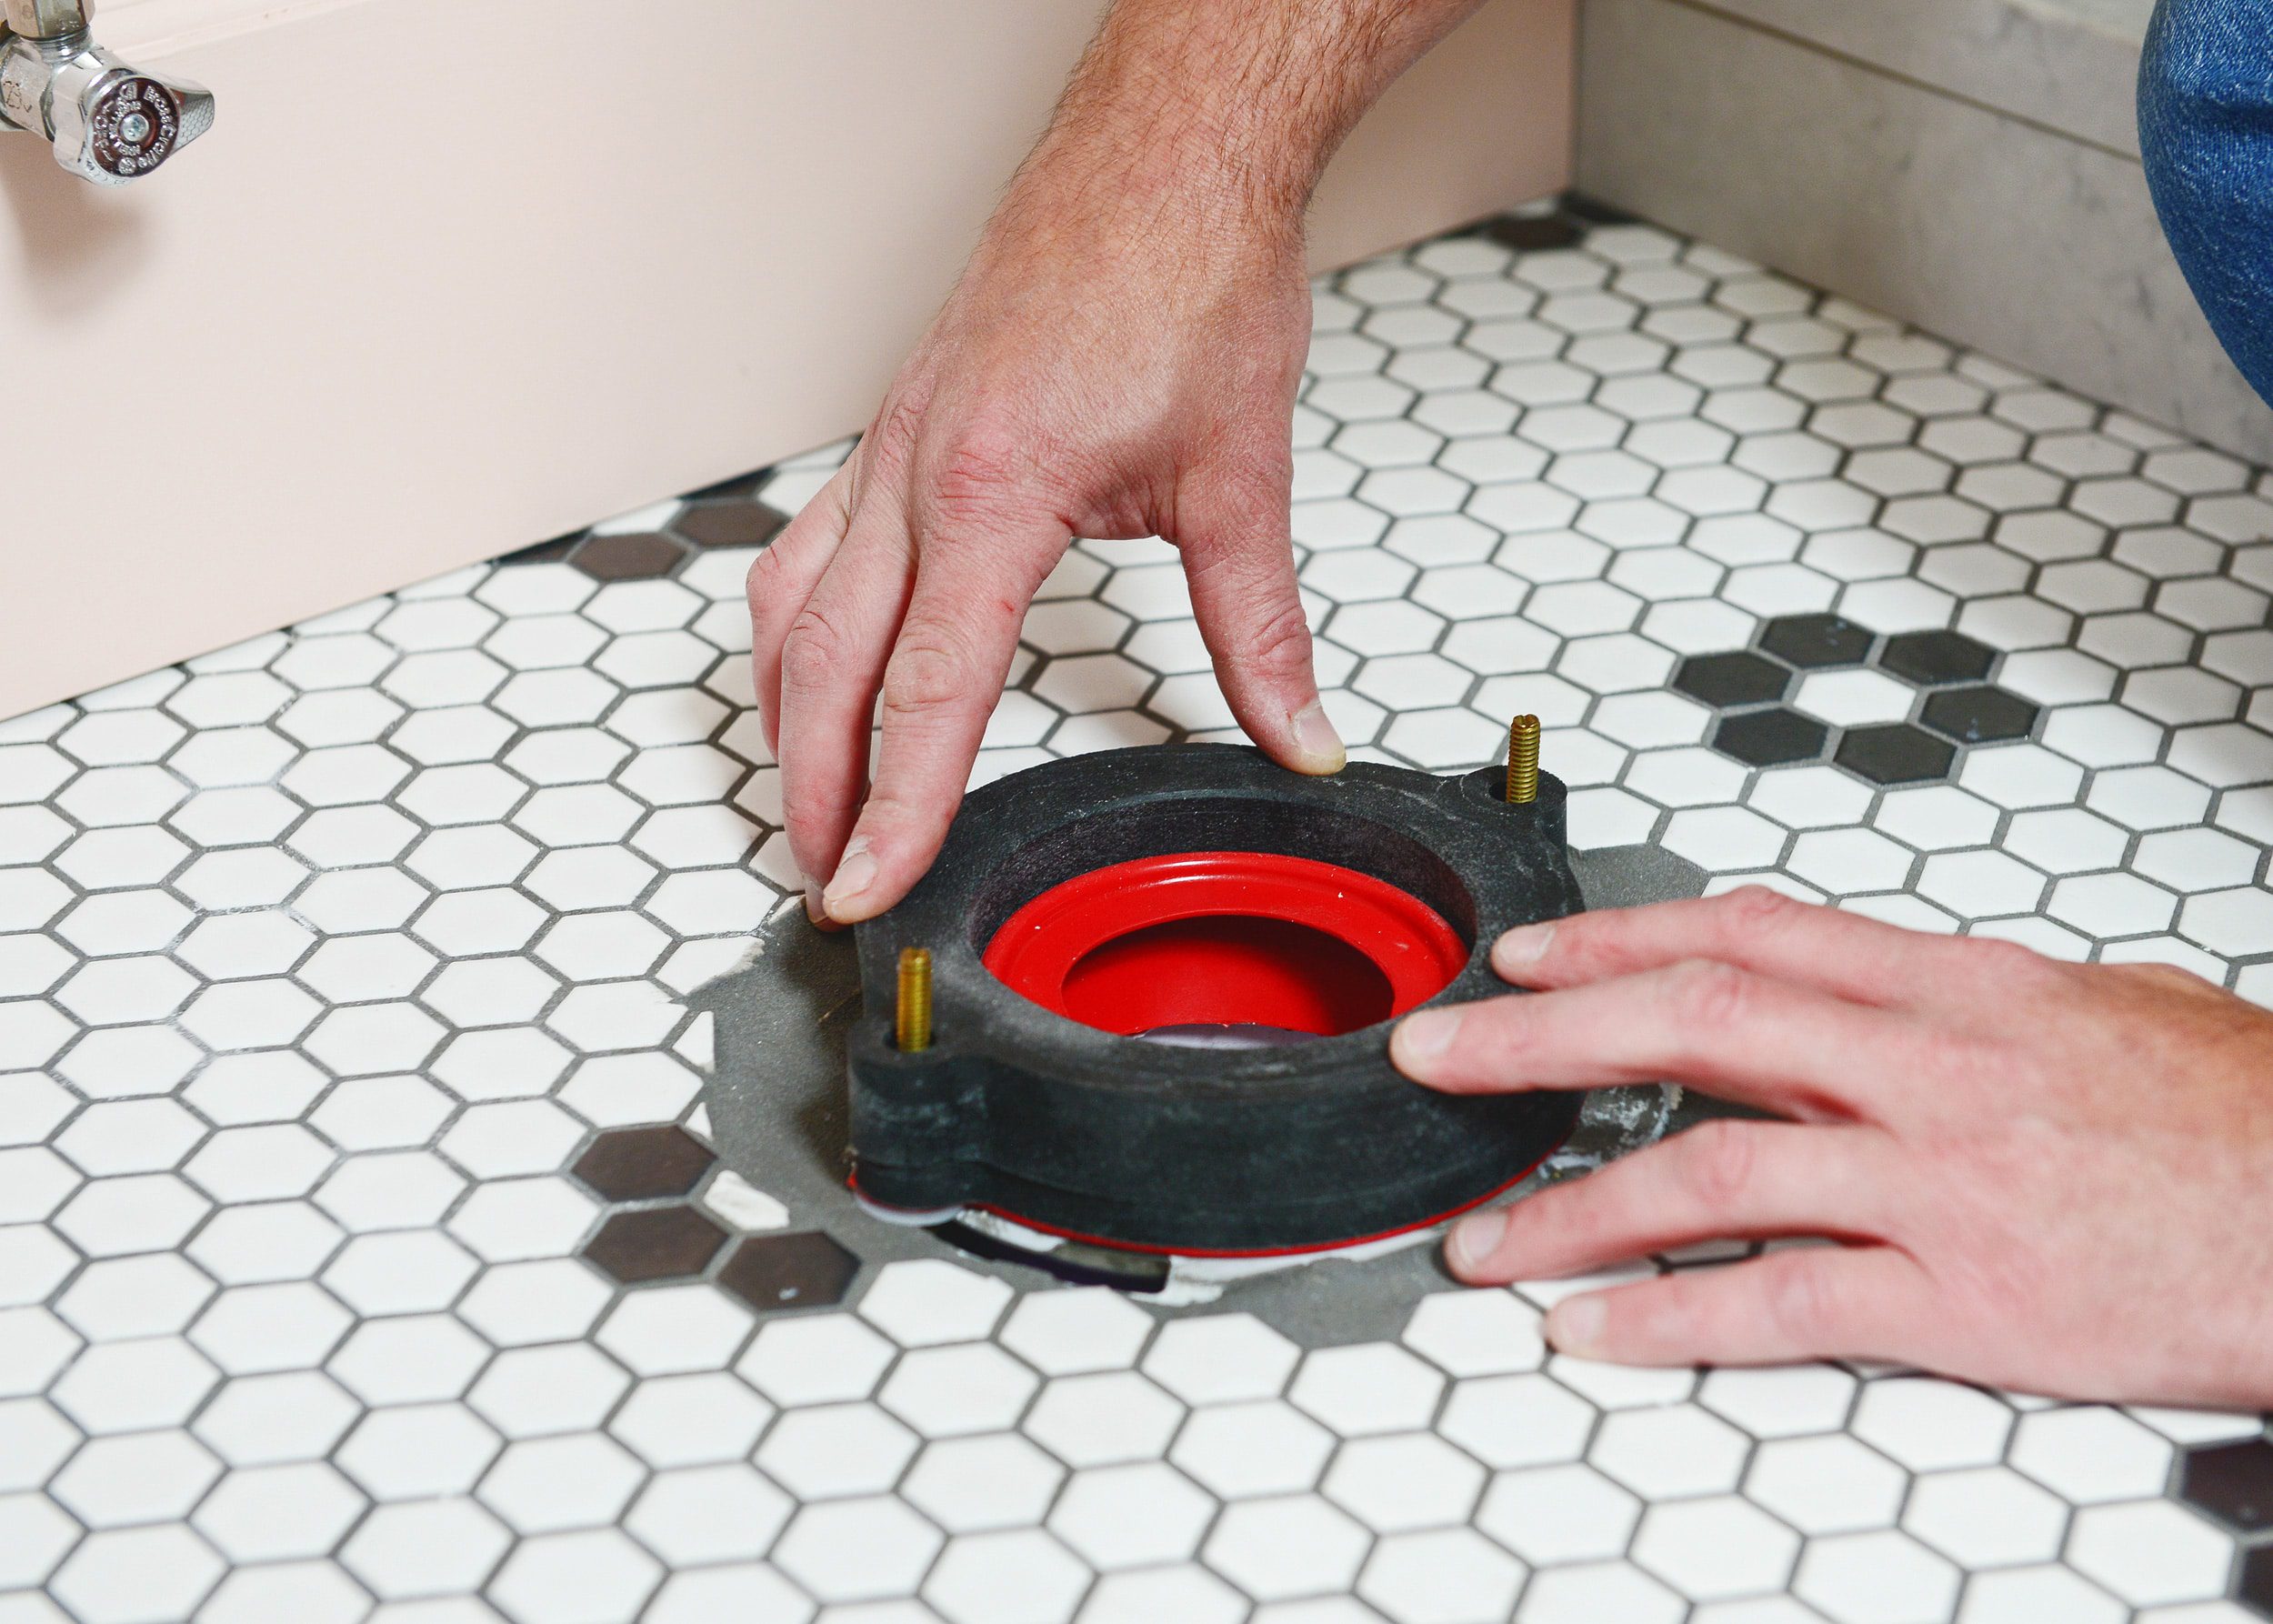 How to install a toilet - an easy step by step DIY tutorial from Yellow Brick Home. 